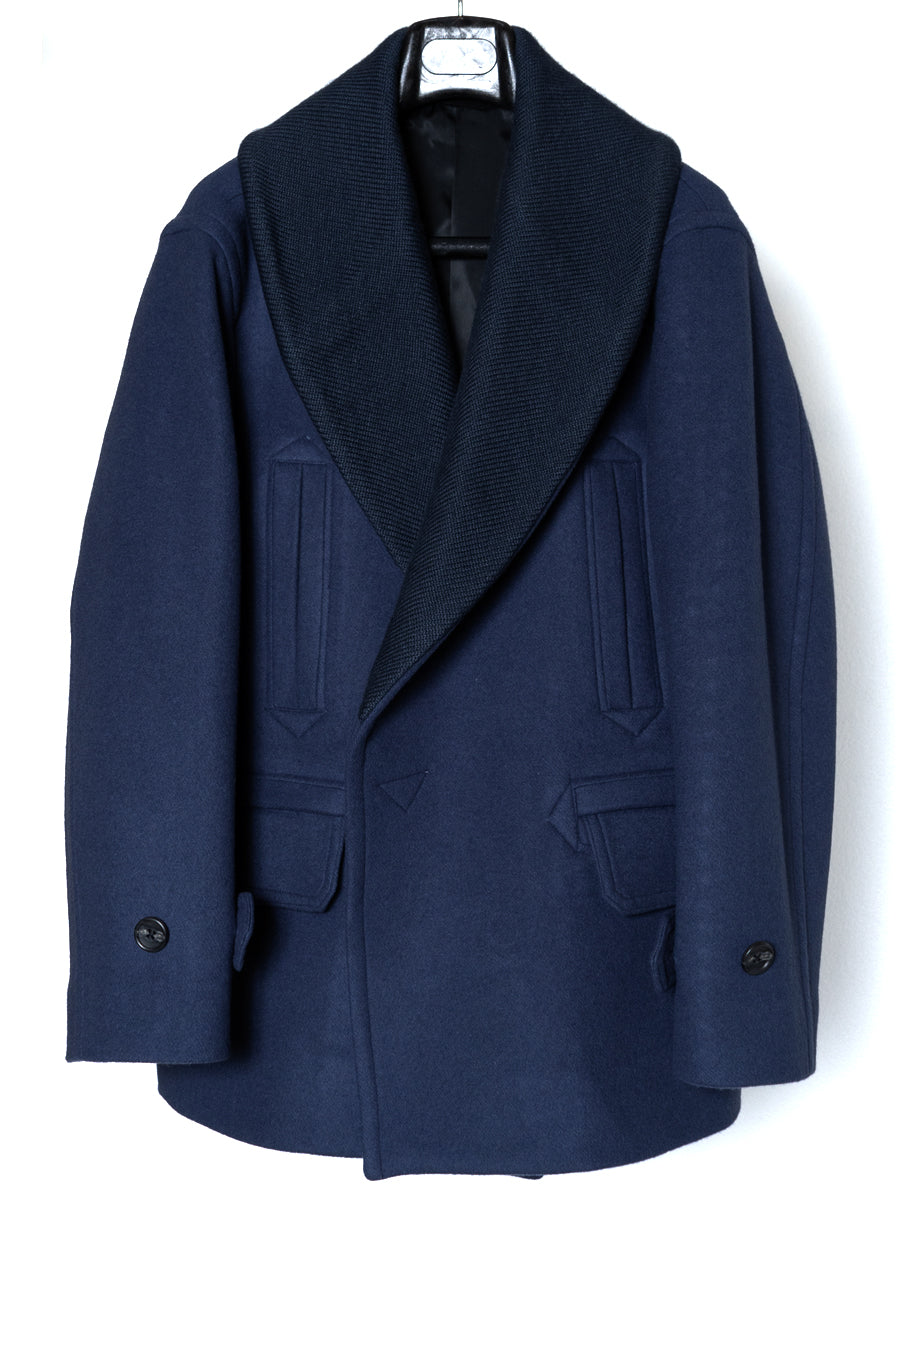 OUTER – RAINMAKER KYOTO